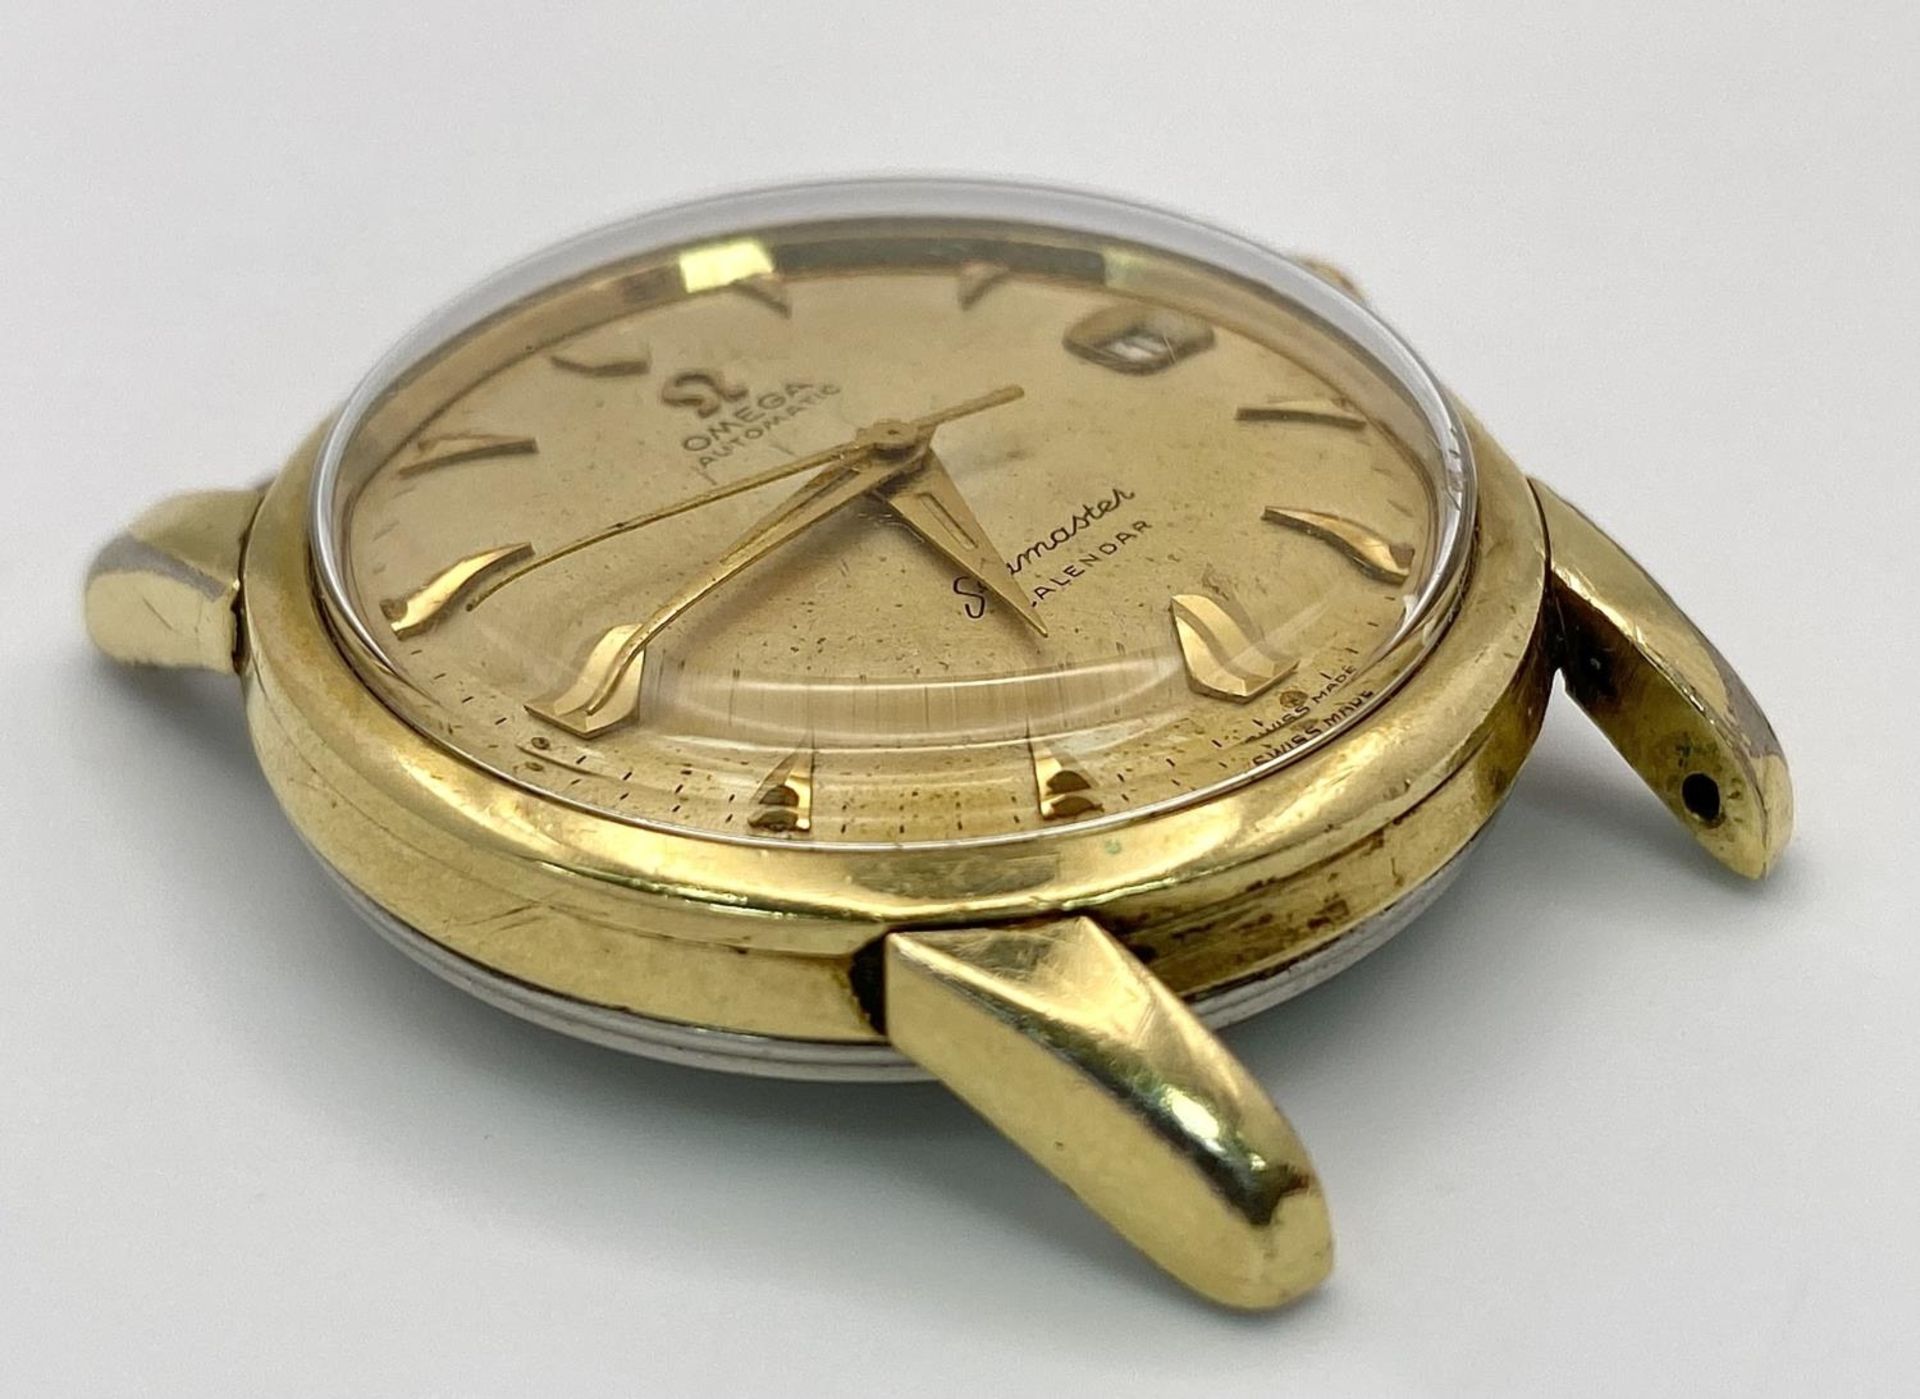 A Vintage Omega Seamaster Calendar Automatic Watch Case - 34mm. Gilded dial with date window. In - Image 3 of 5